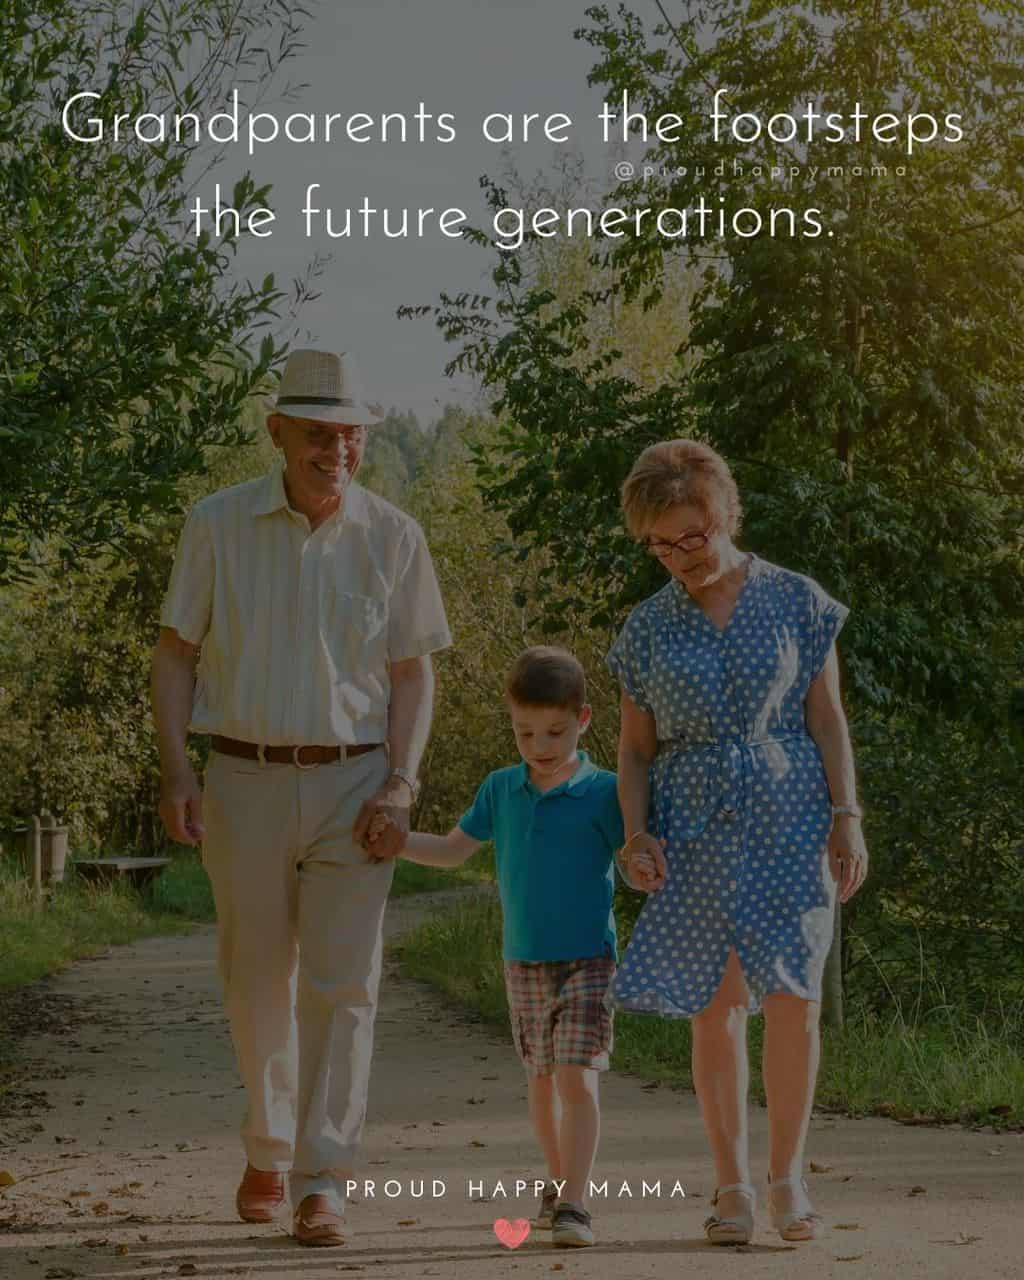 Grandparent Quotes – Grandparents are the footsteps to the future generations.’